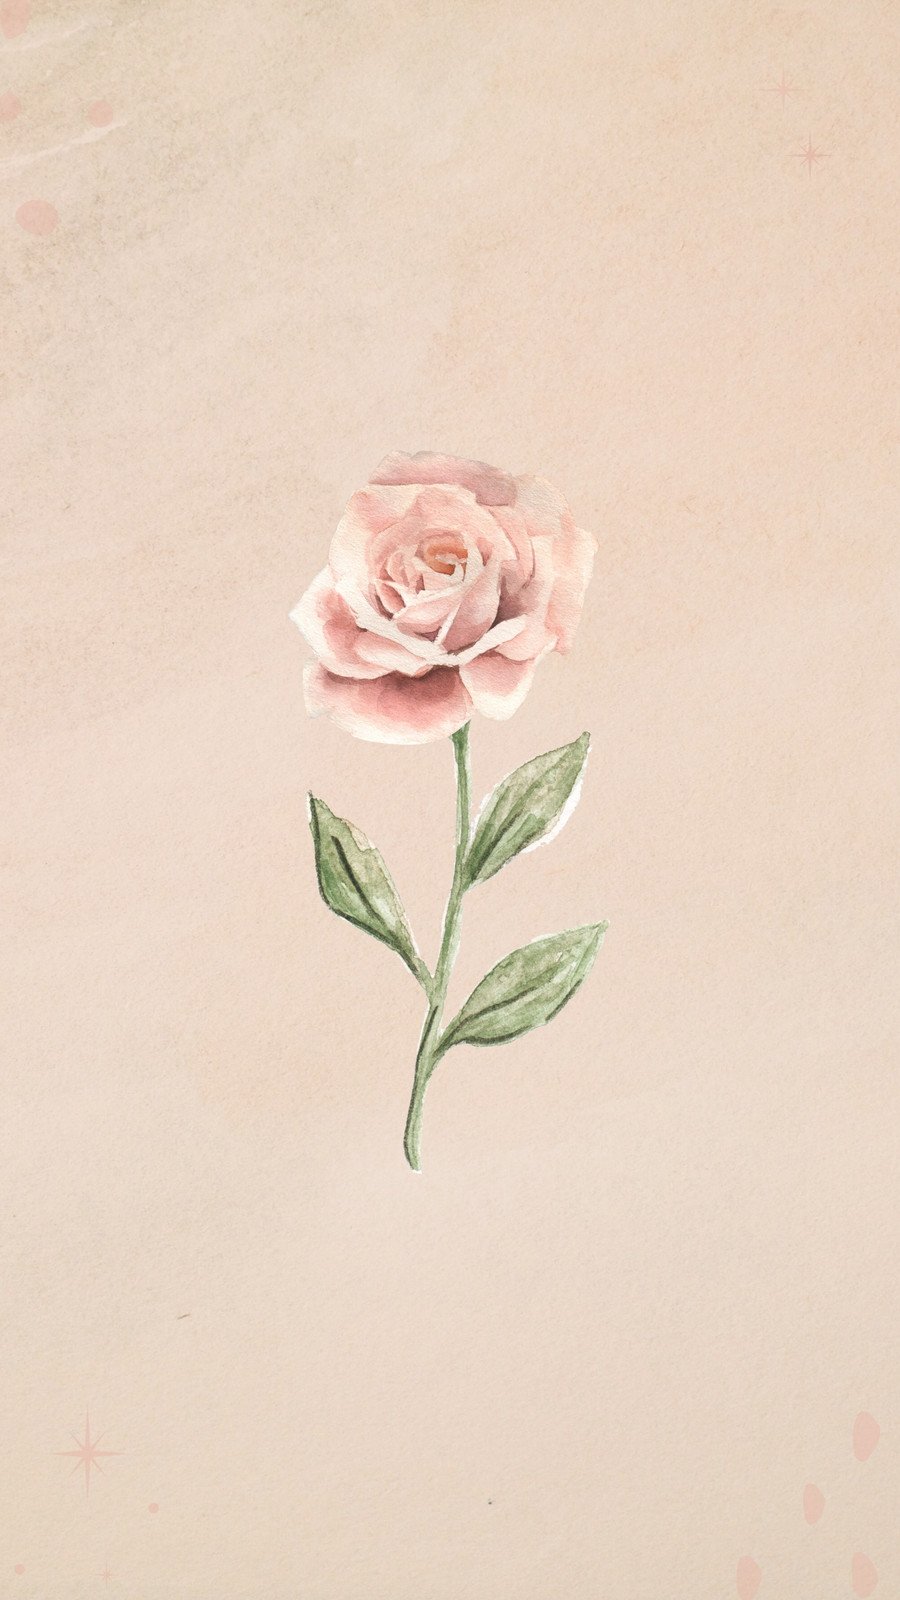 pink roses wallpaper for iphone